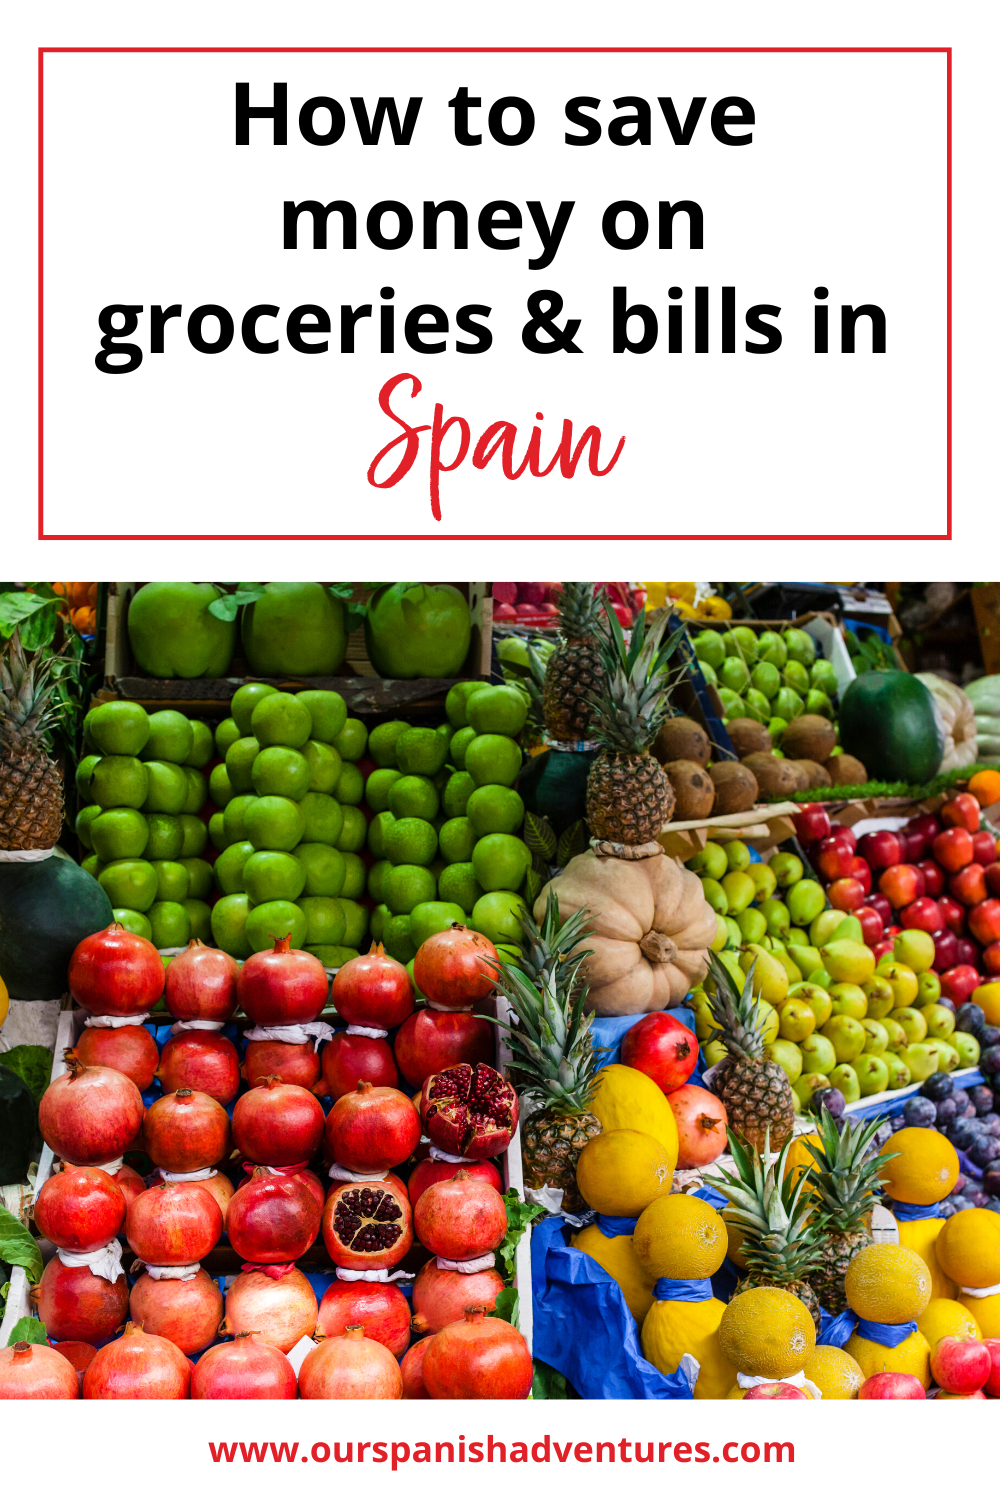 How to save money on groceries and bills in Spain | Our Spanish Adventures